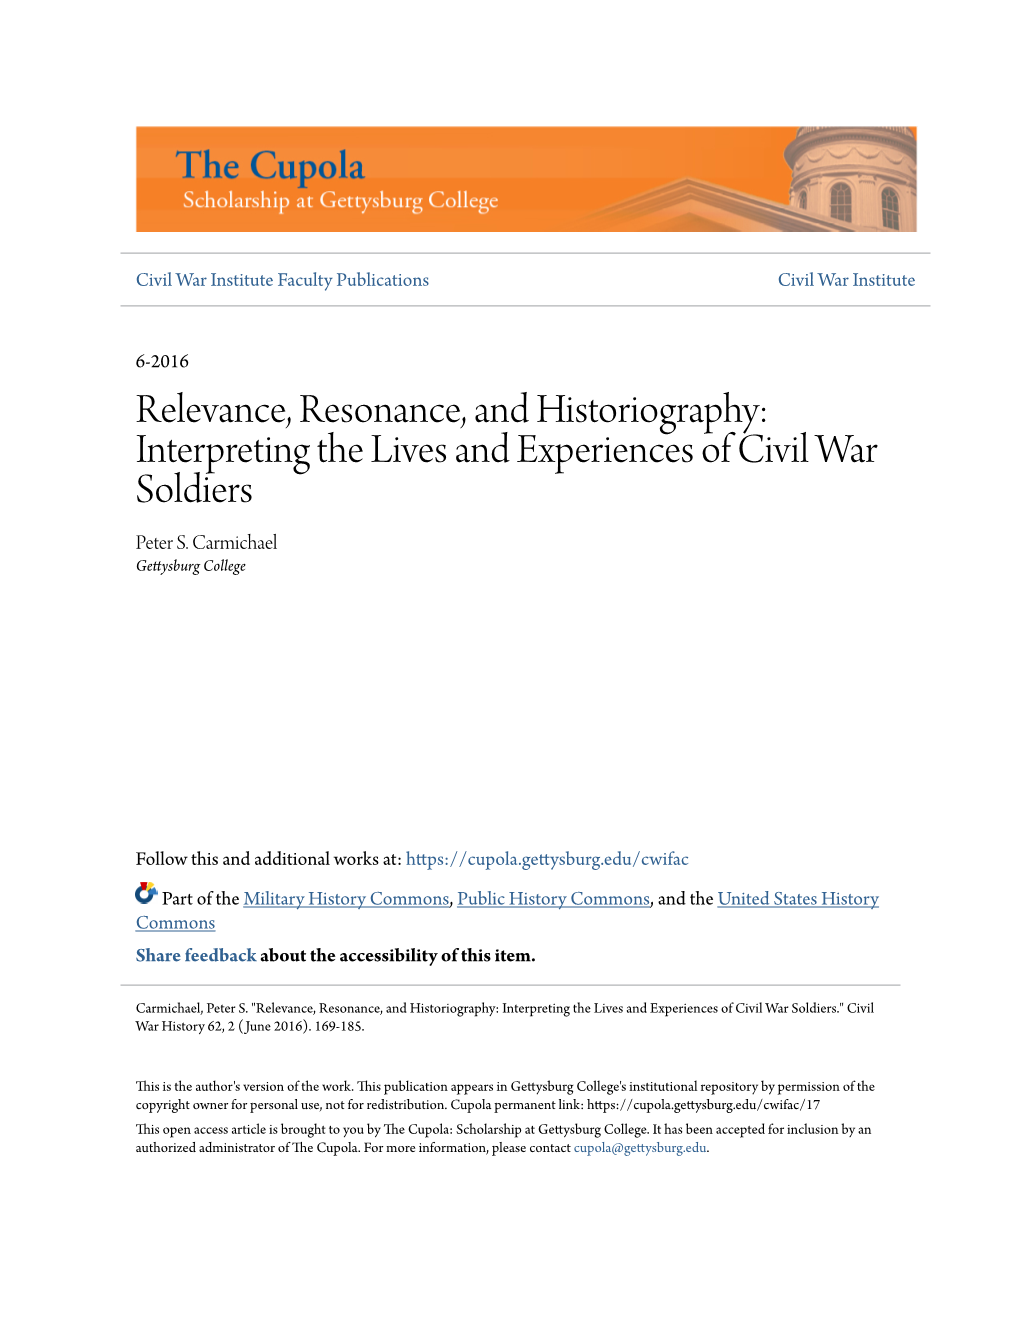 Relevance, Resonance, and Historiography: Interpreting the Lives and Experiences of Civil War Soldiers Peter S